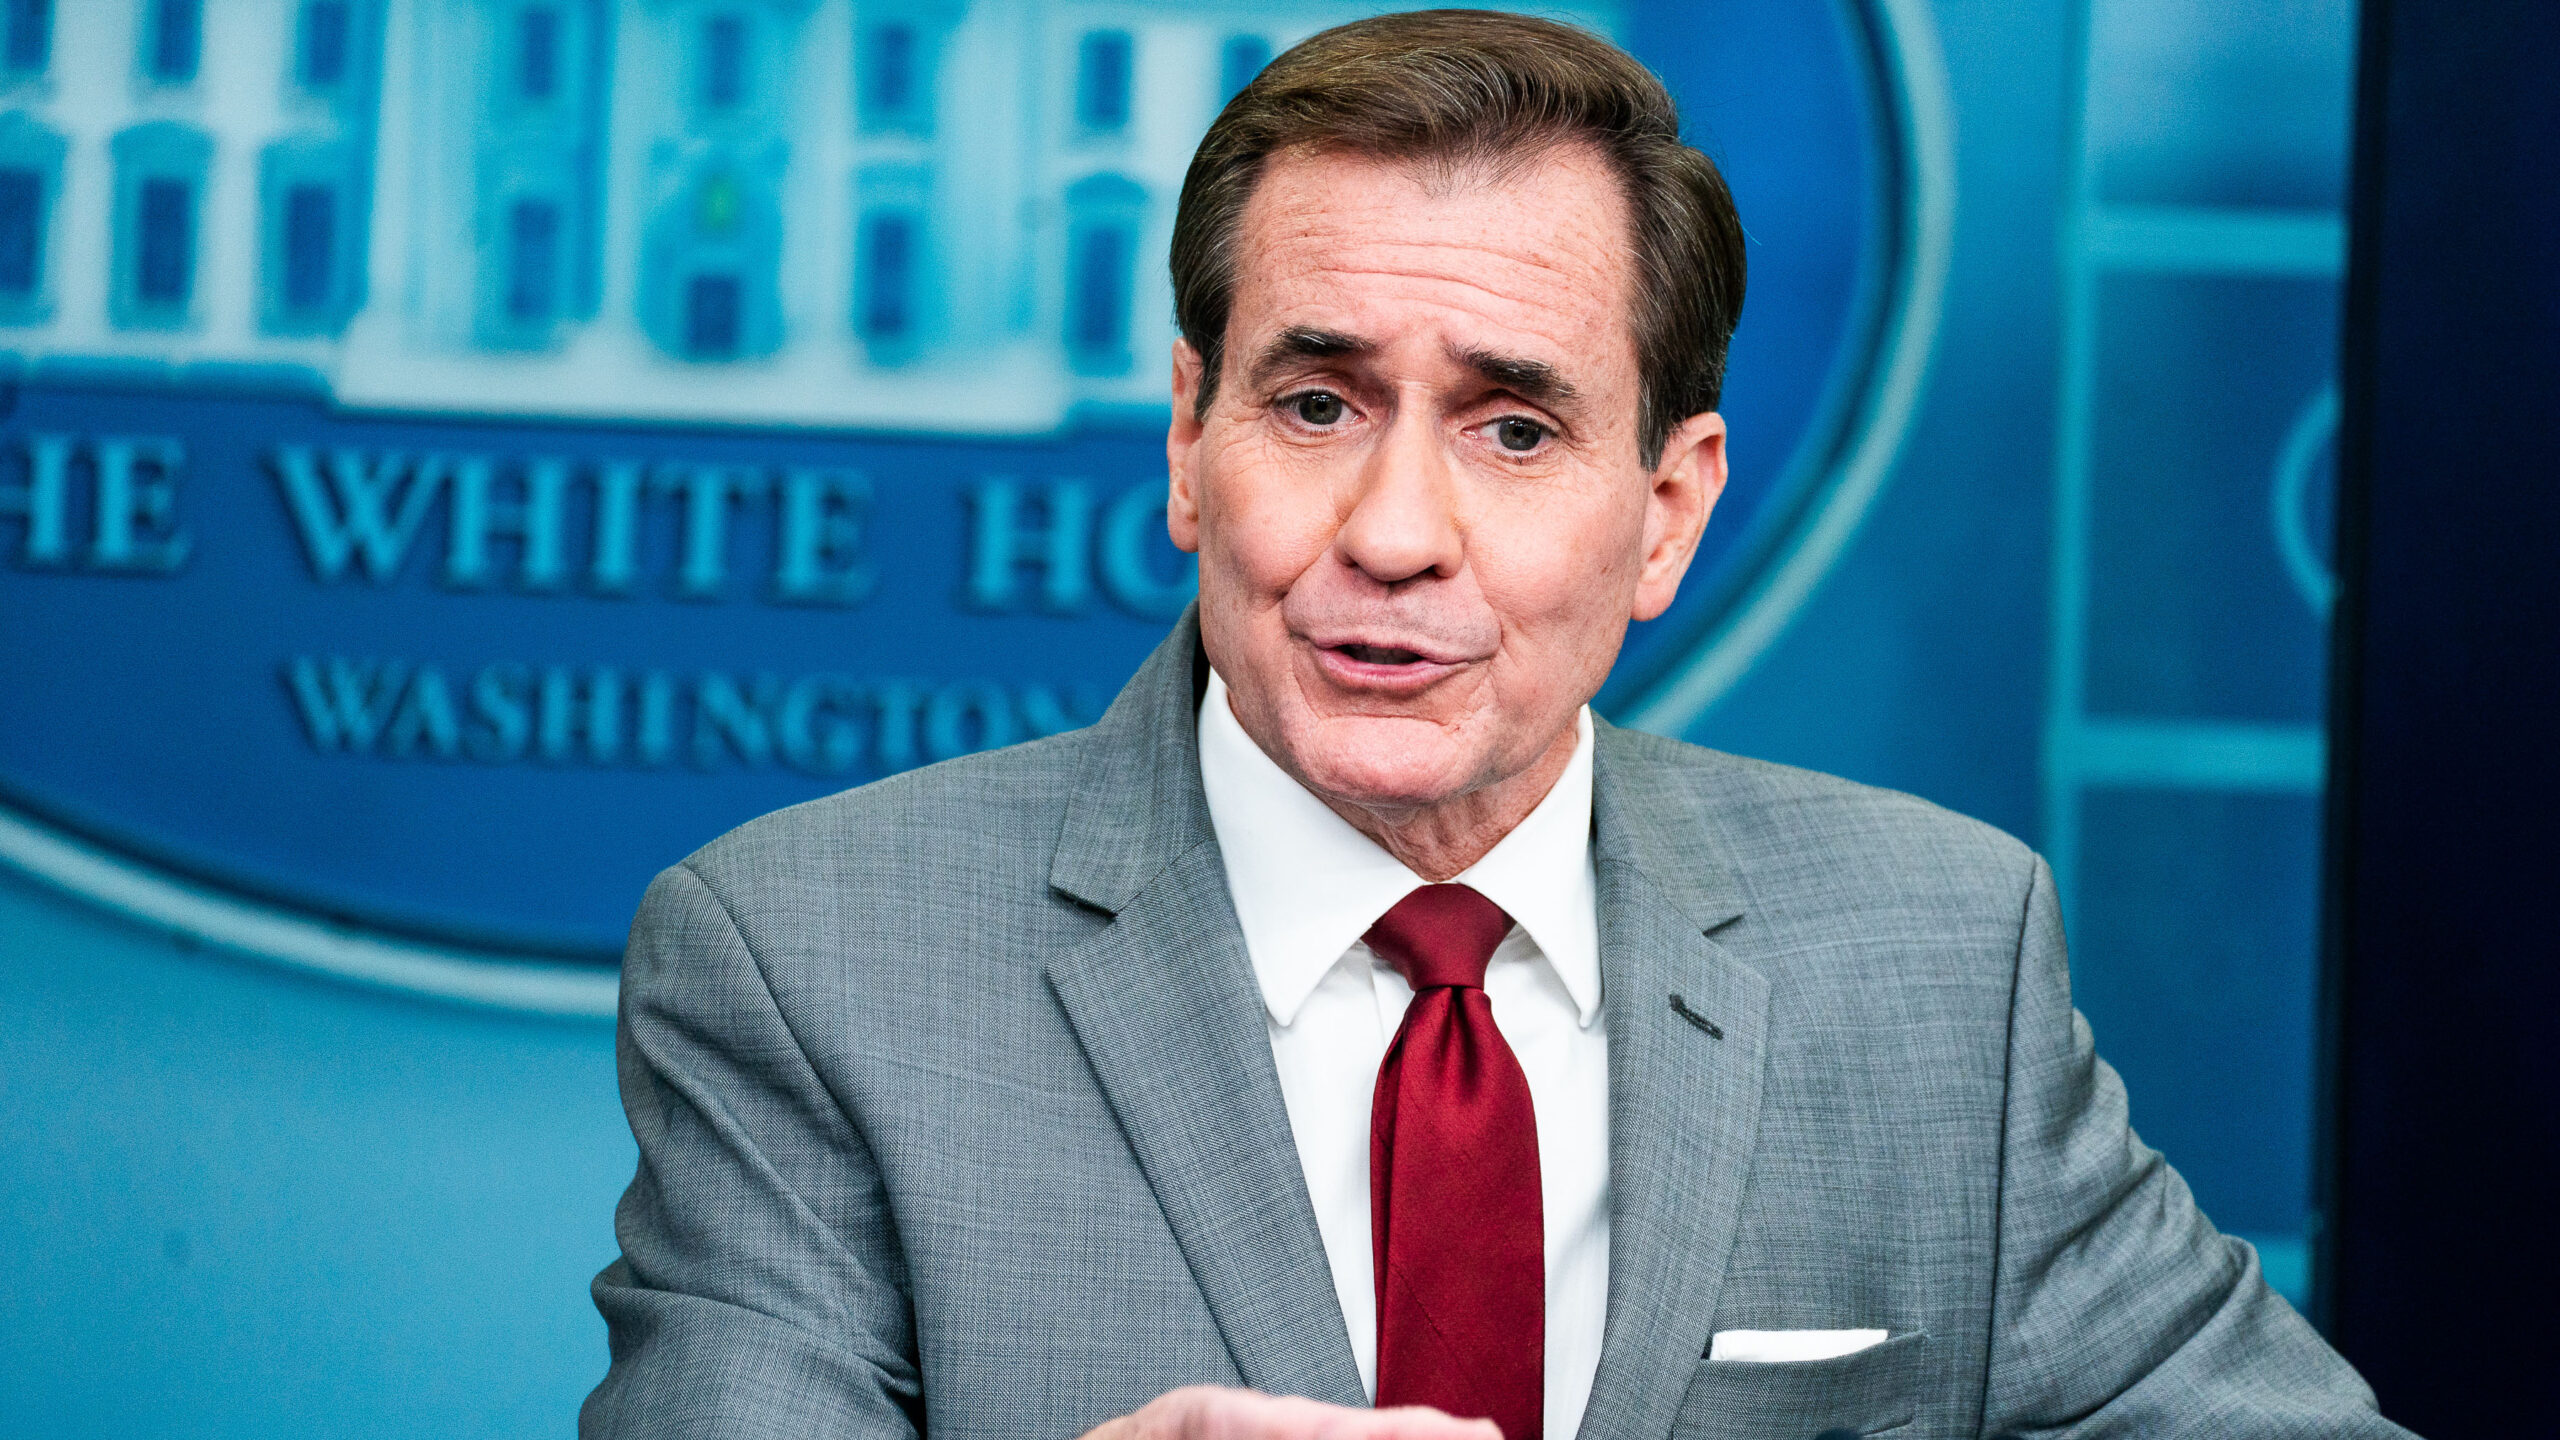 John Kirby states that the U.S. has not observed any evidence of Israel breaching international humanitarian law